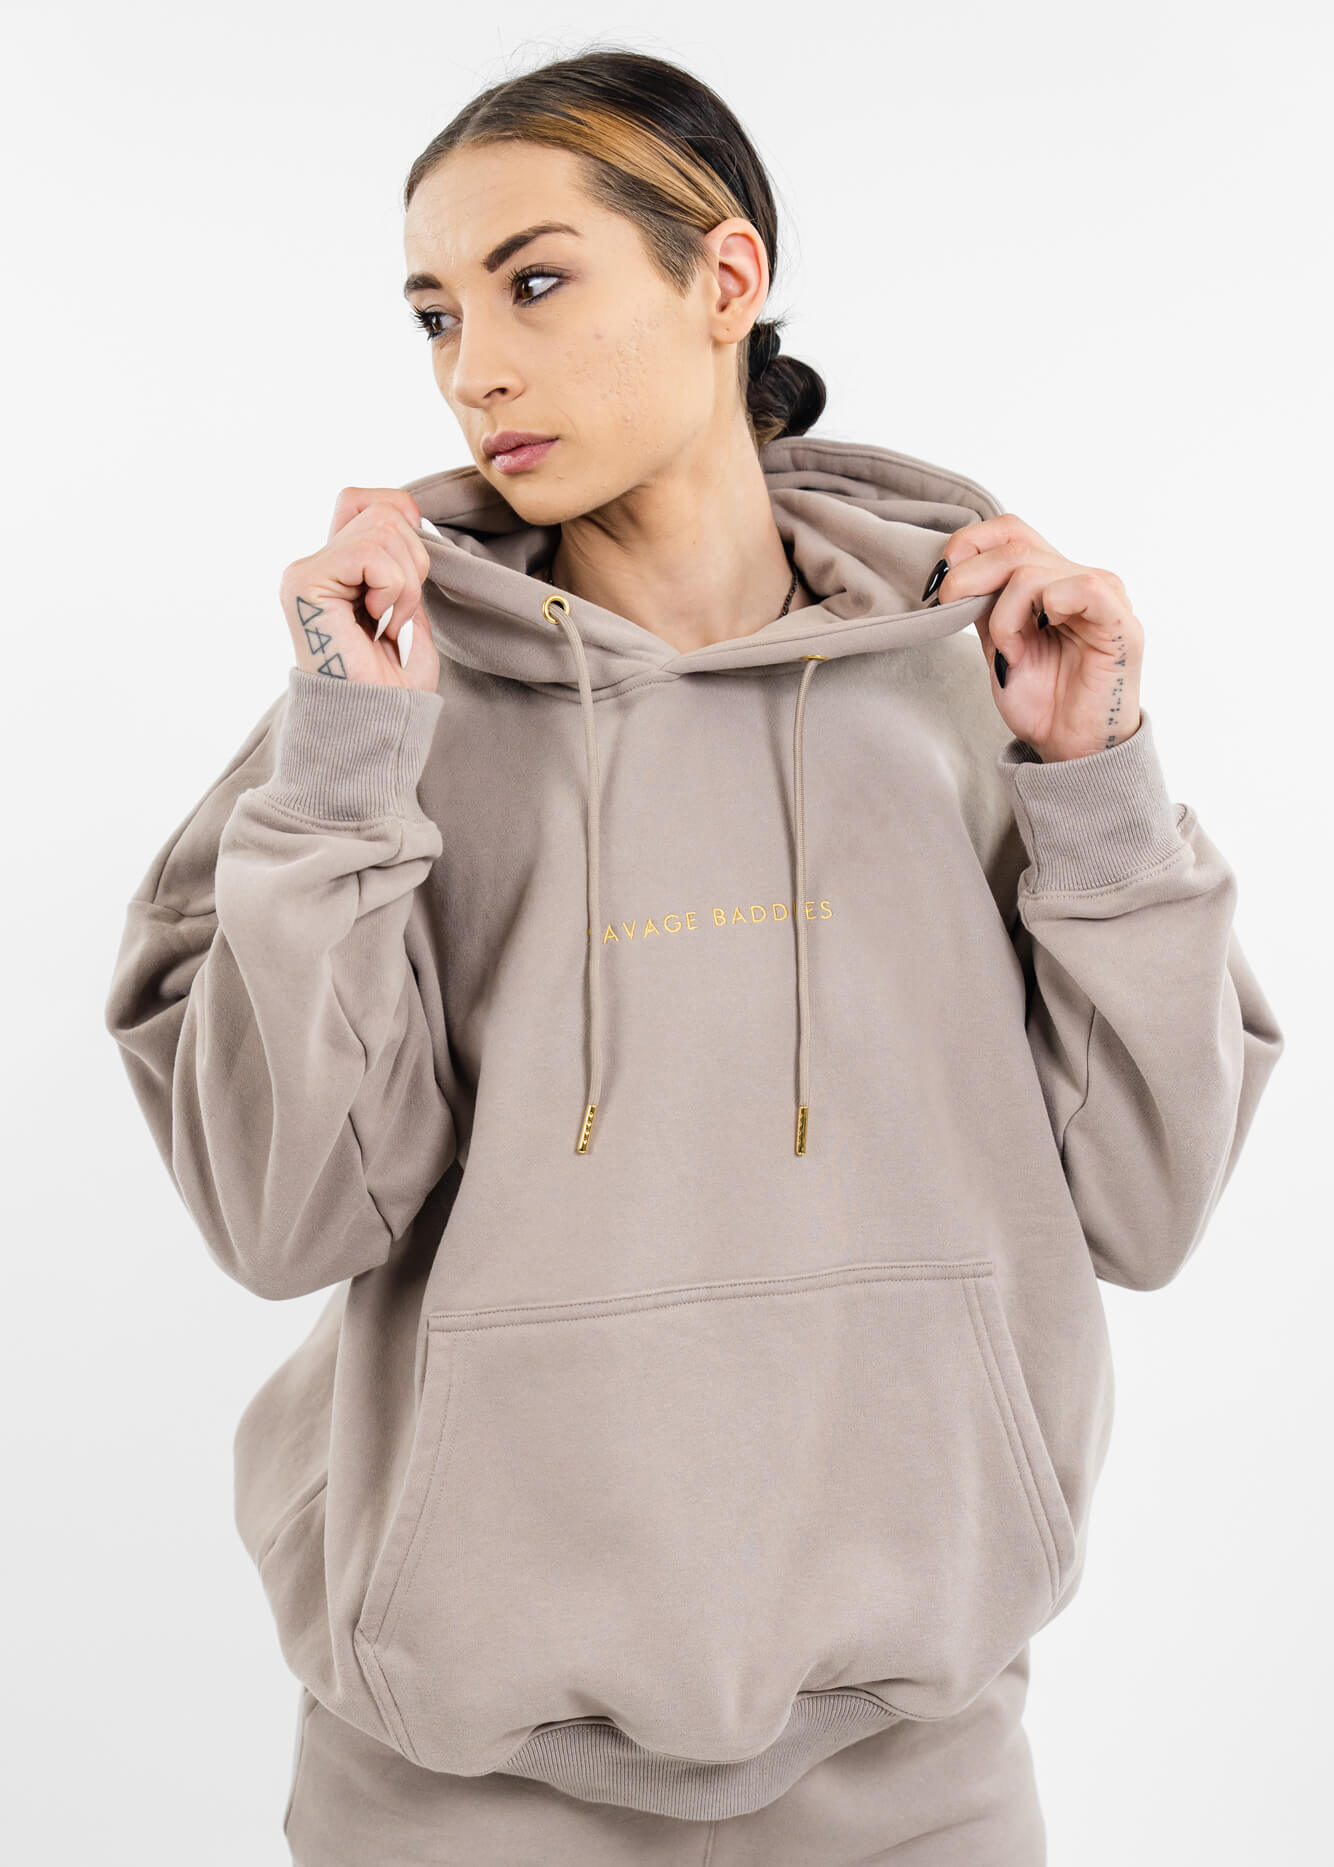 sexy female wearing oversized hoodie with gold accents and gold logo